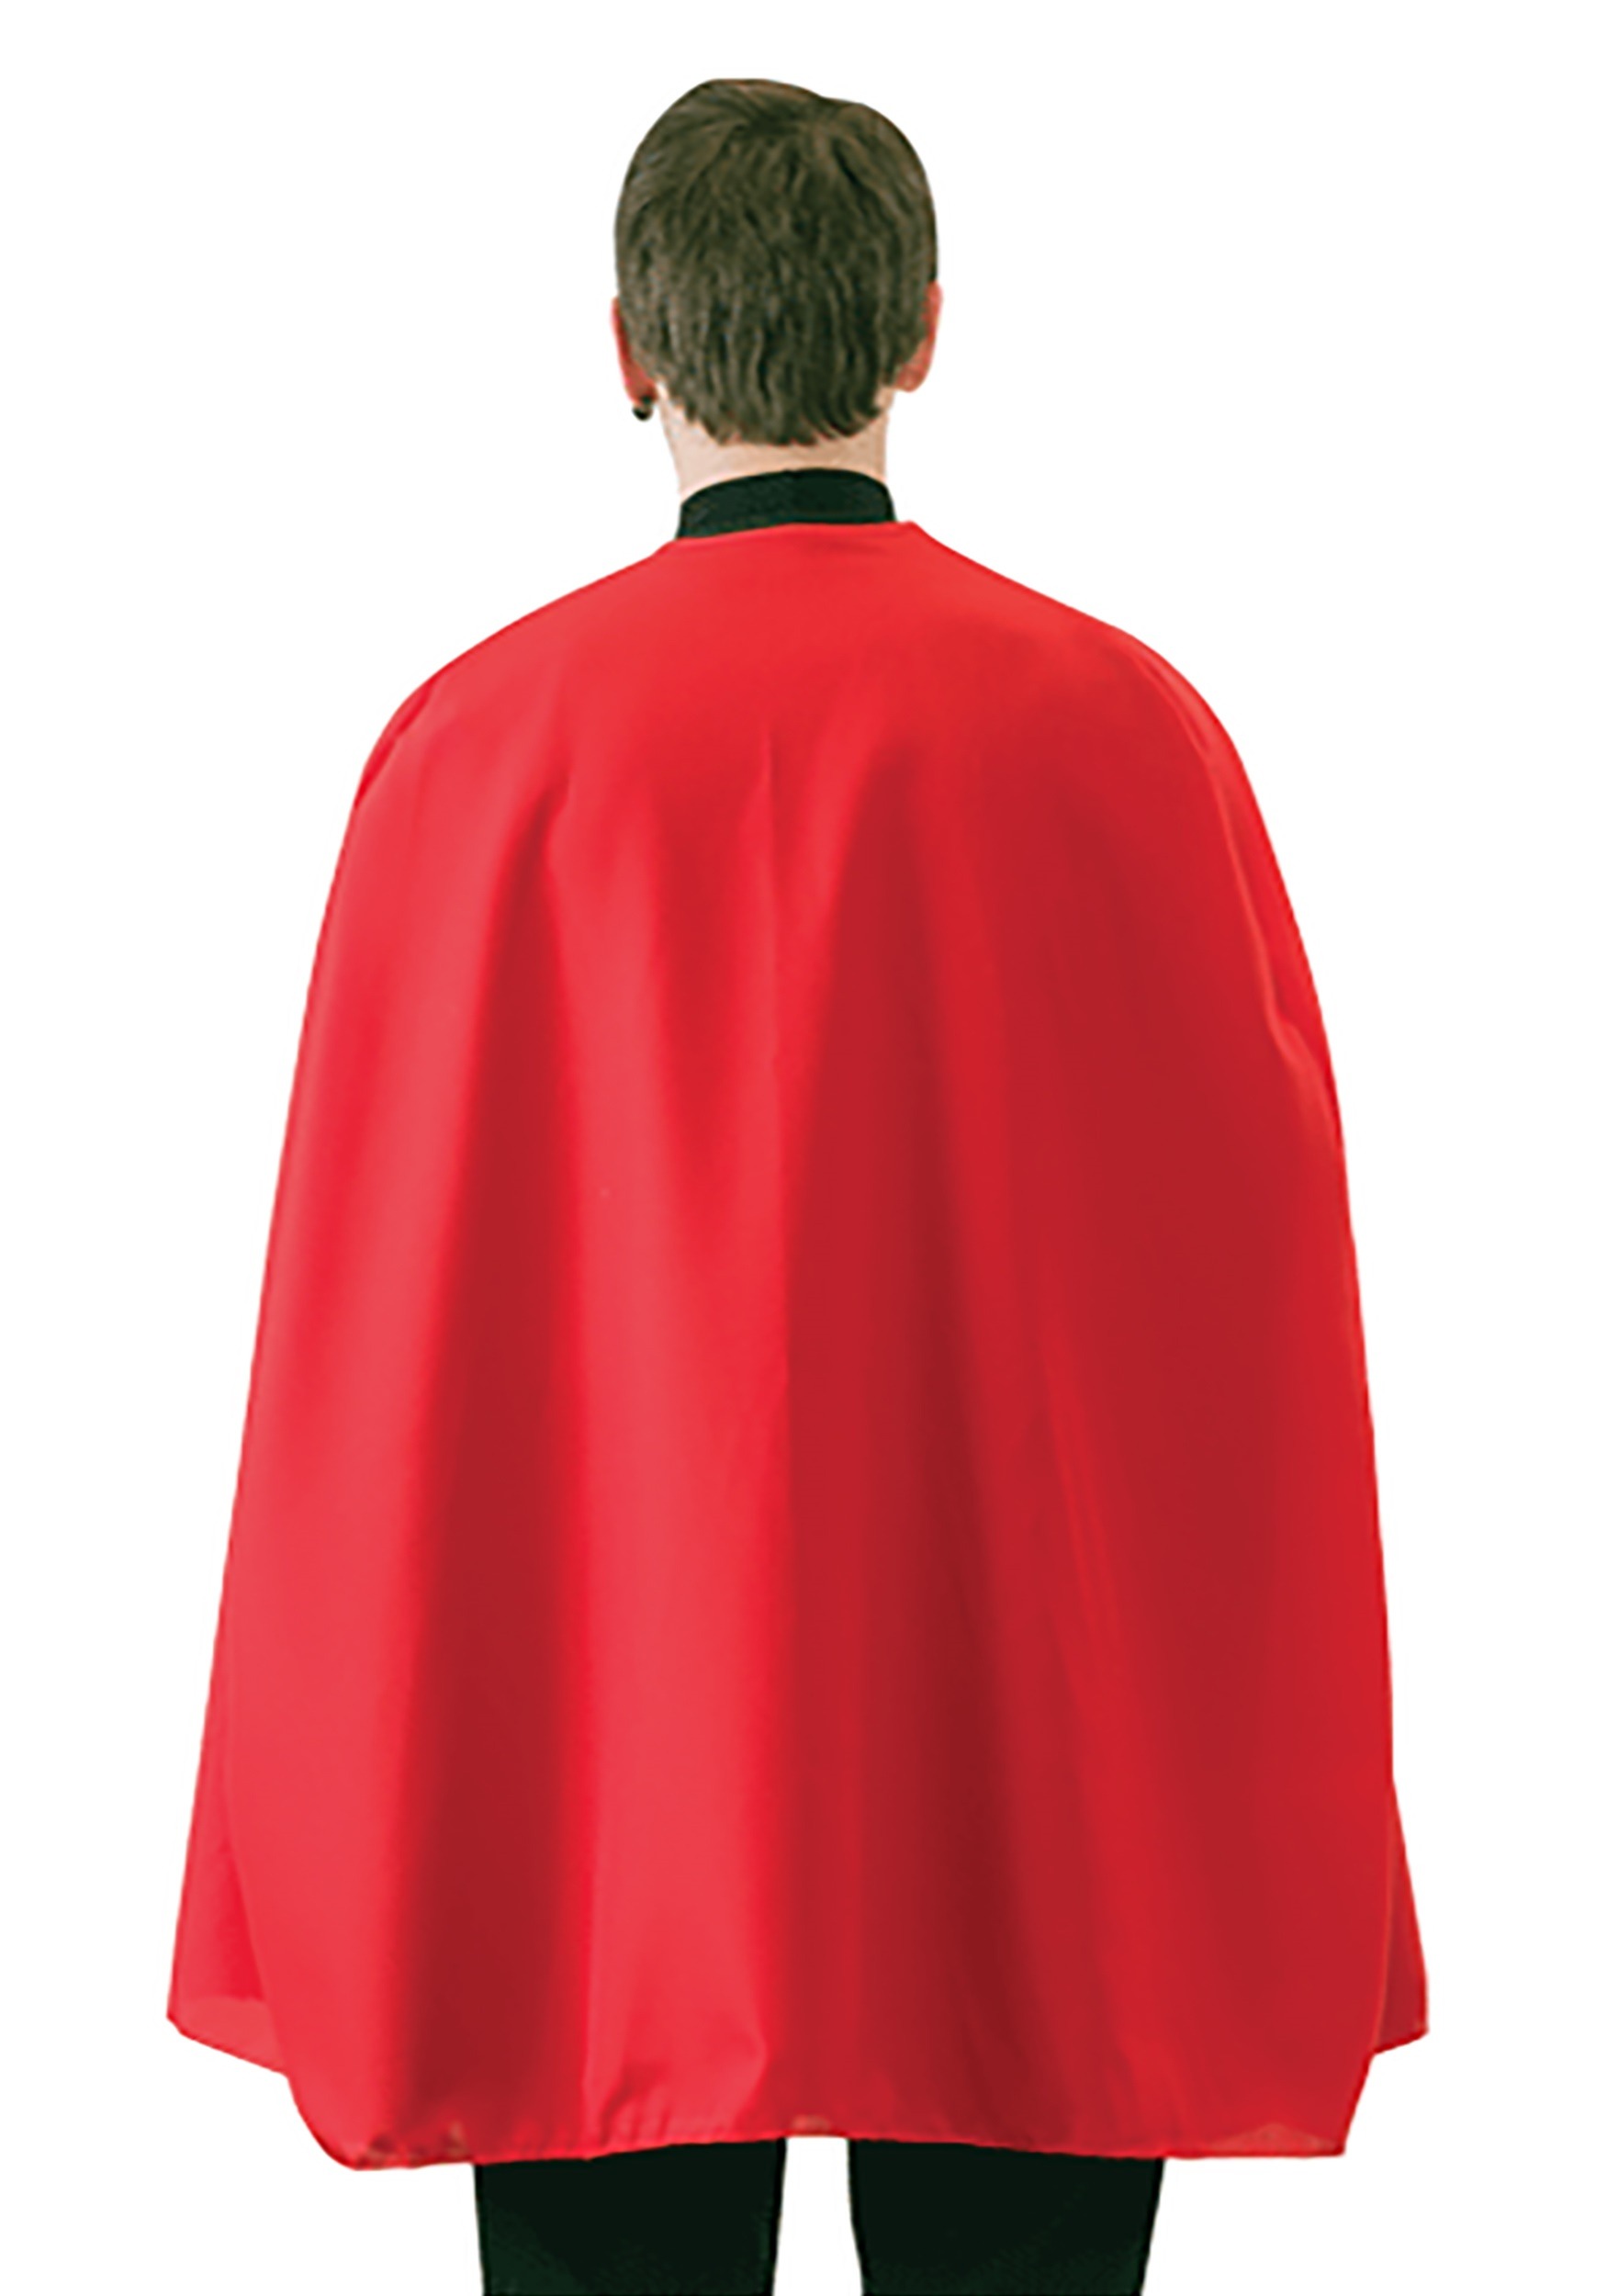 23+ Costumes With Red Cape